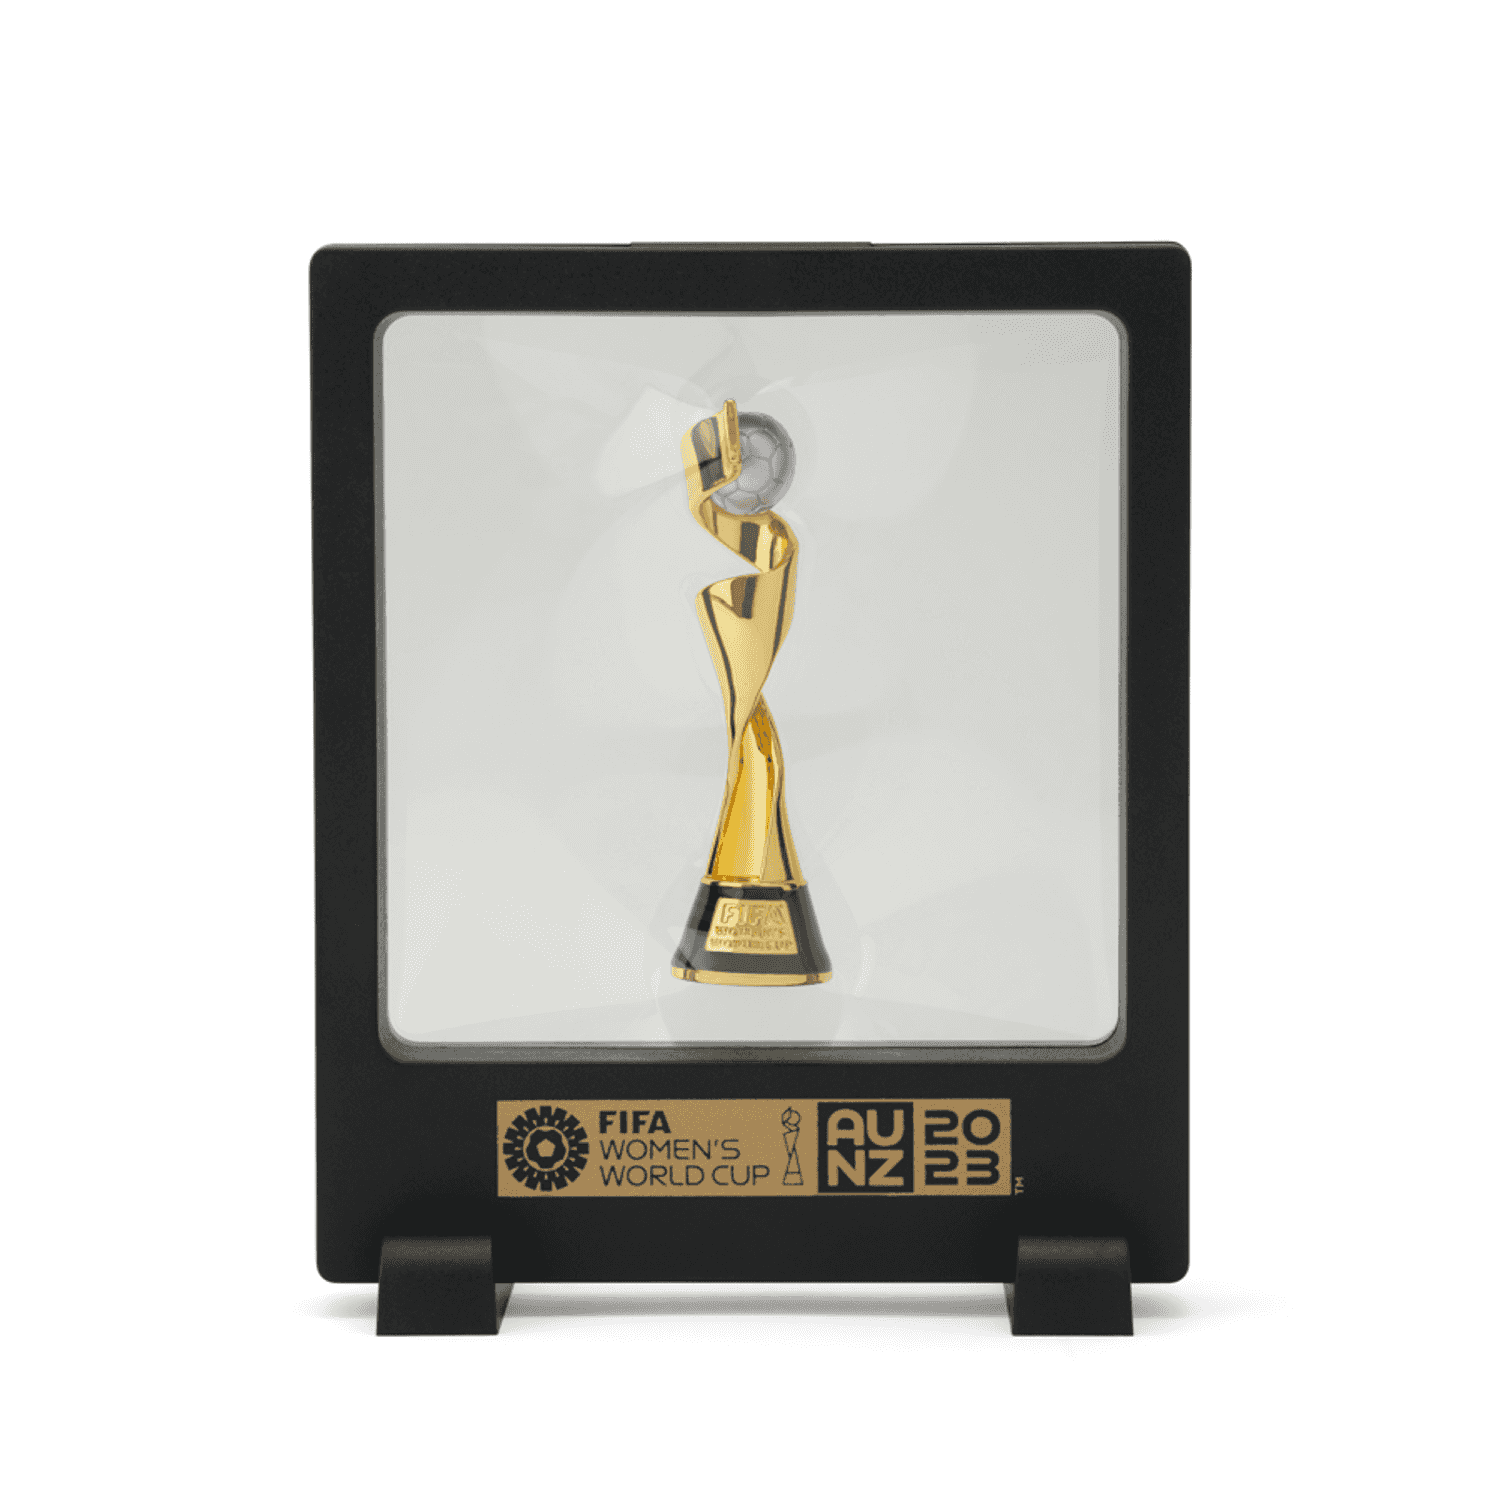 Licensed Replica Women's World Cup Trophy 70mm in display frame